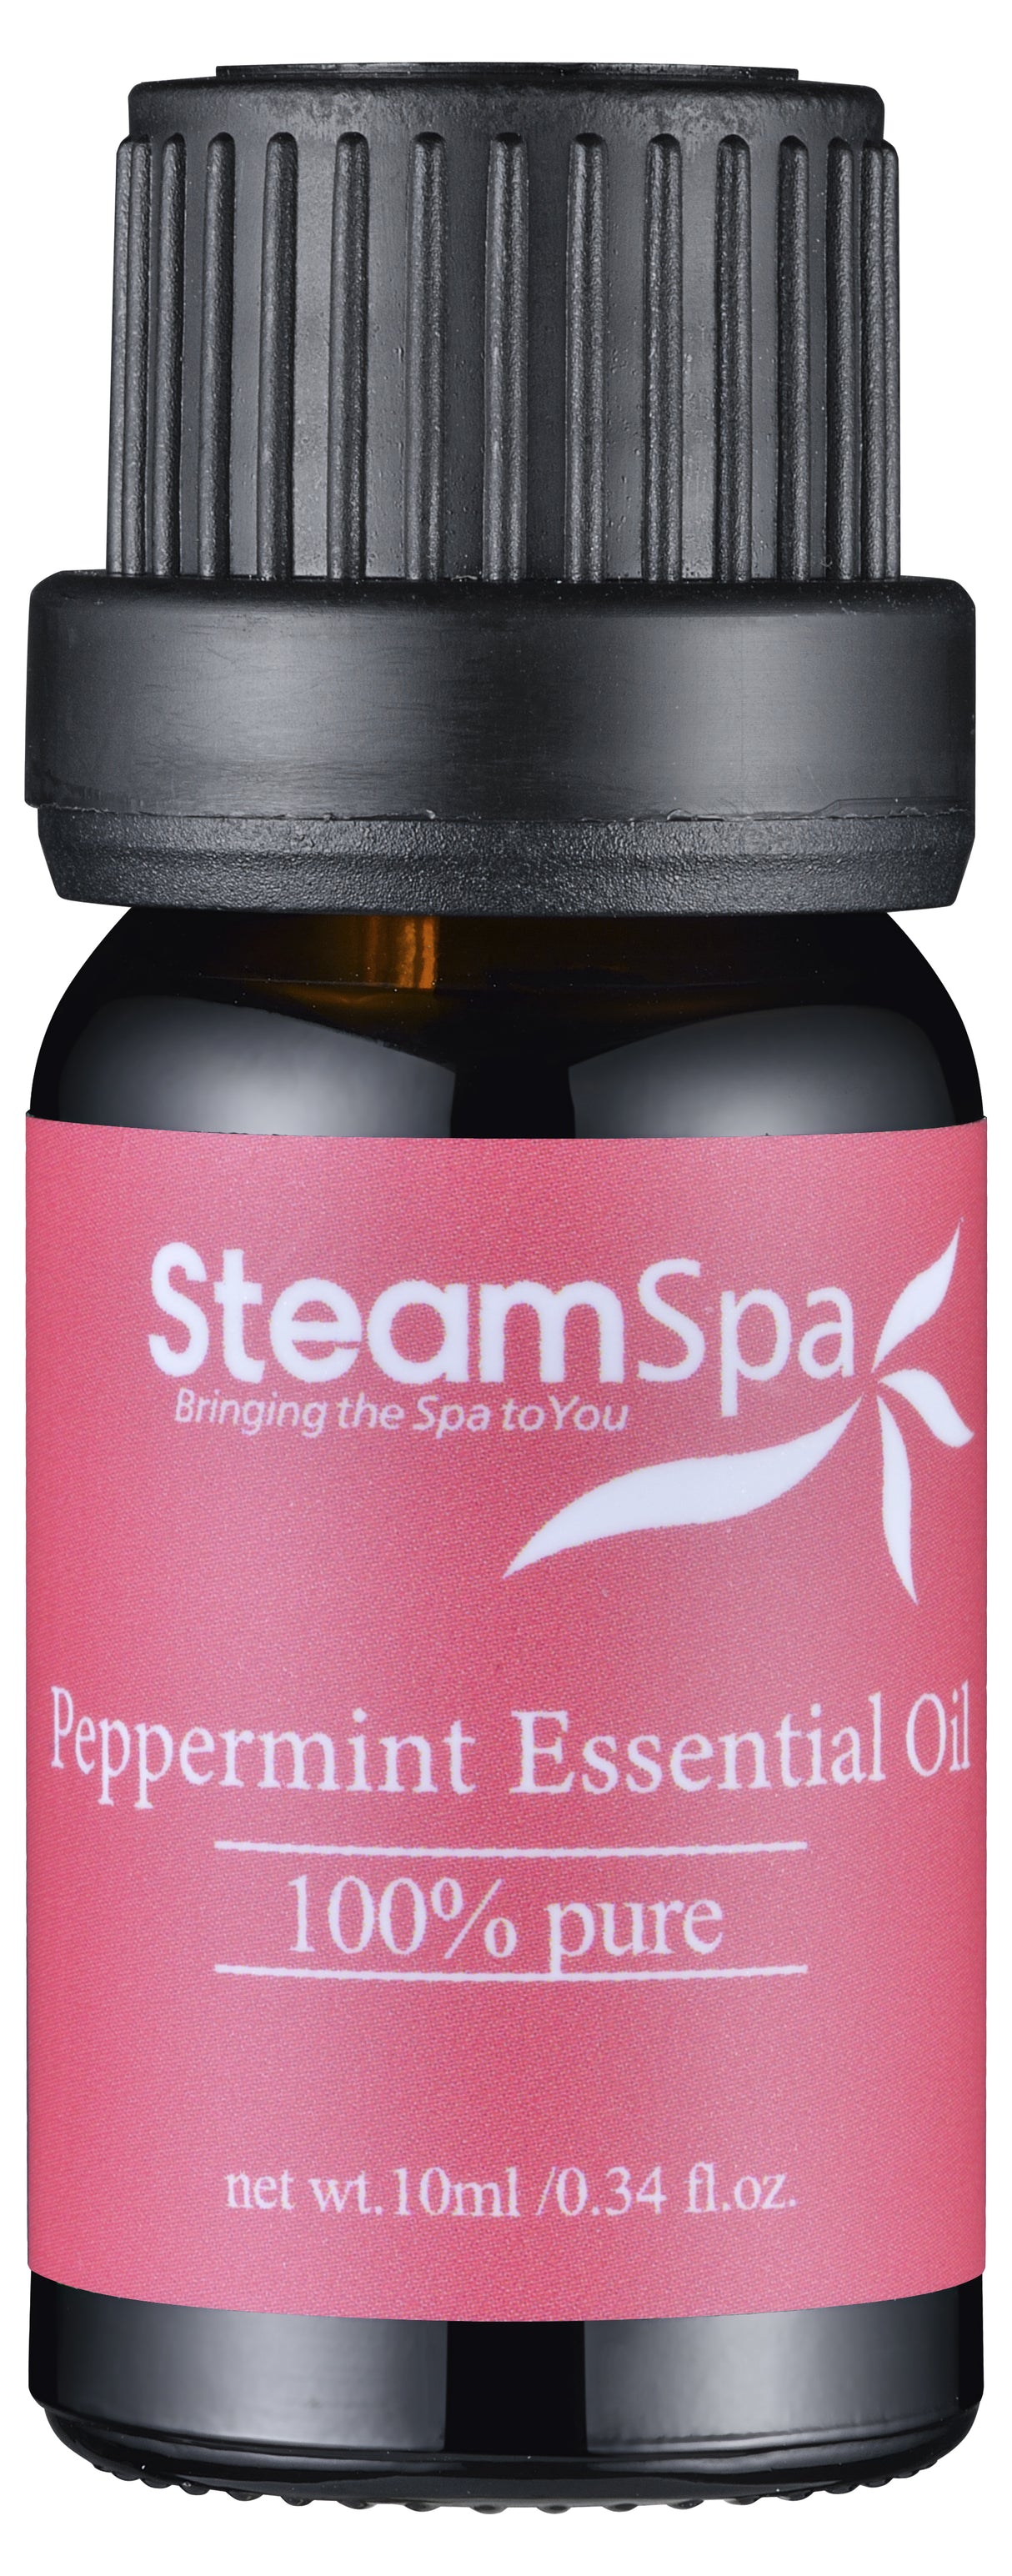 SteamSpa Essence of Peppermint Aromatherapy Oil Extract G-OILPEP